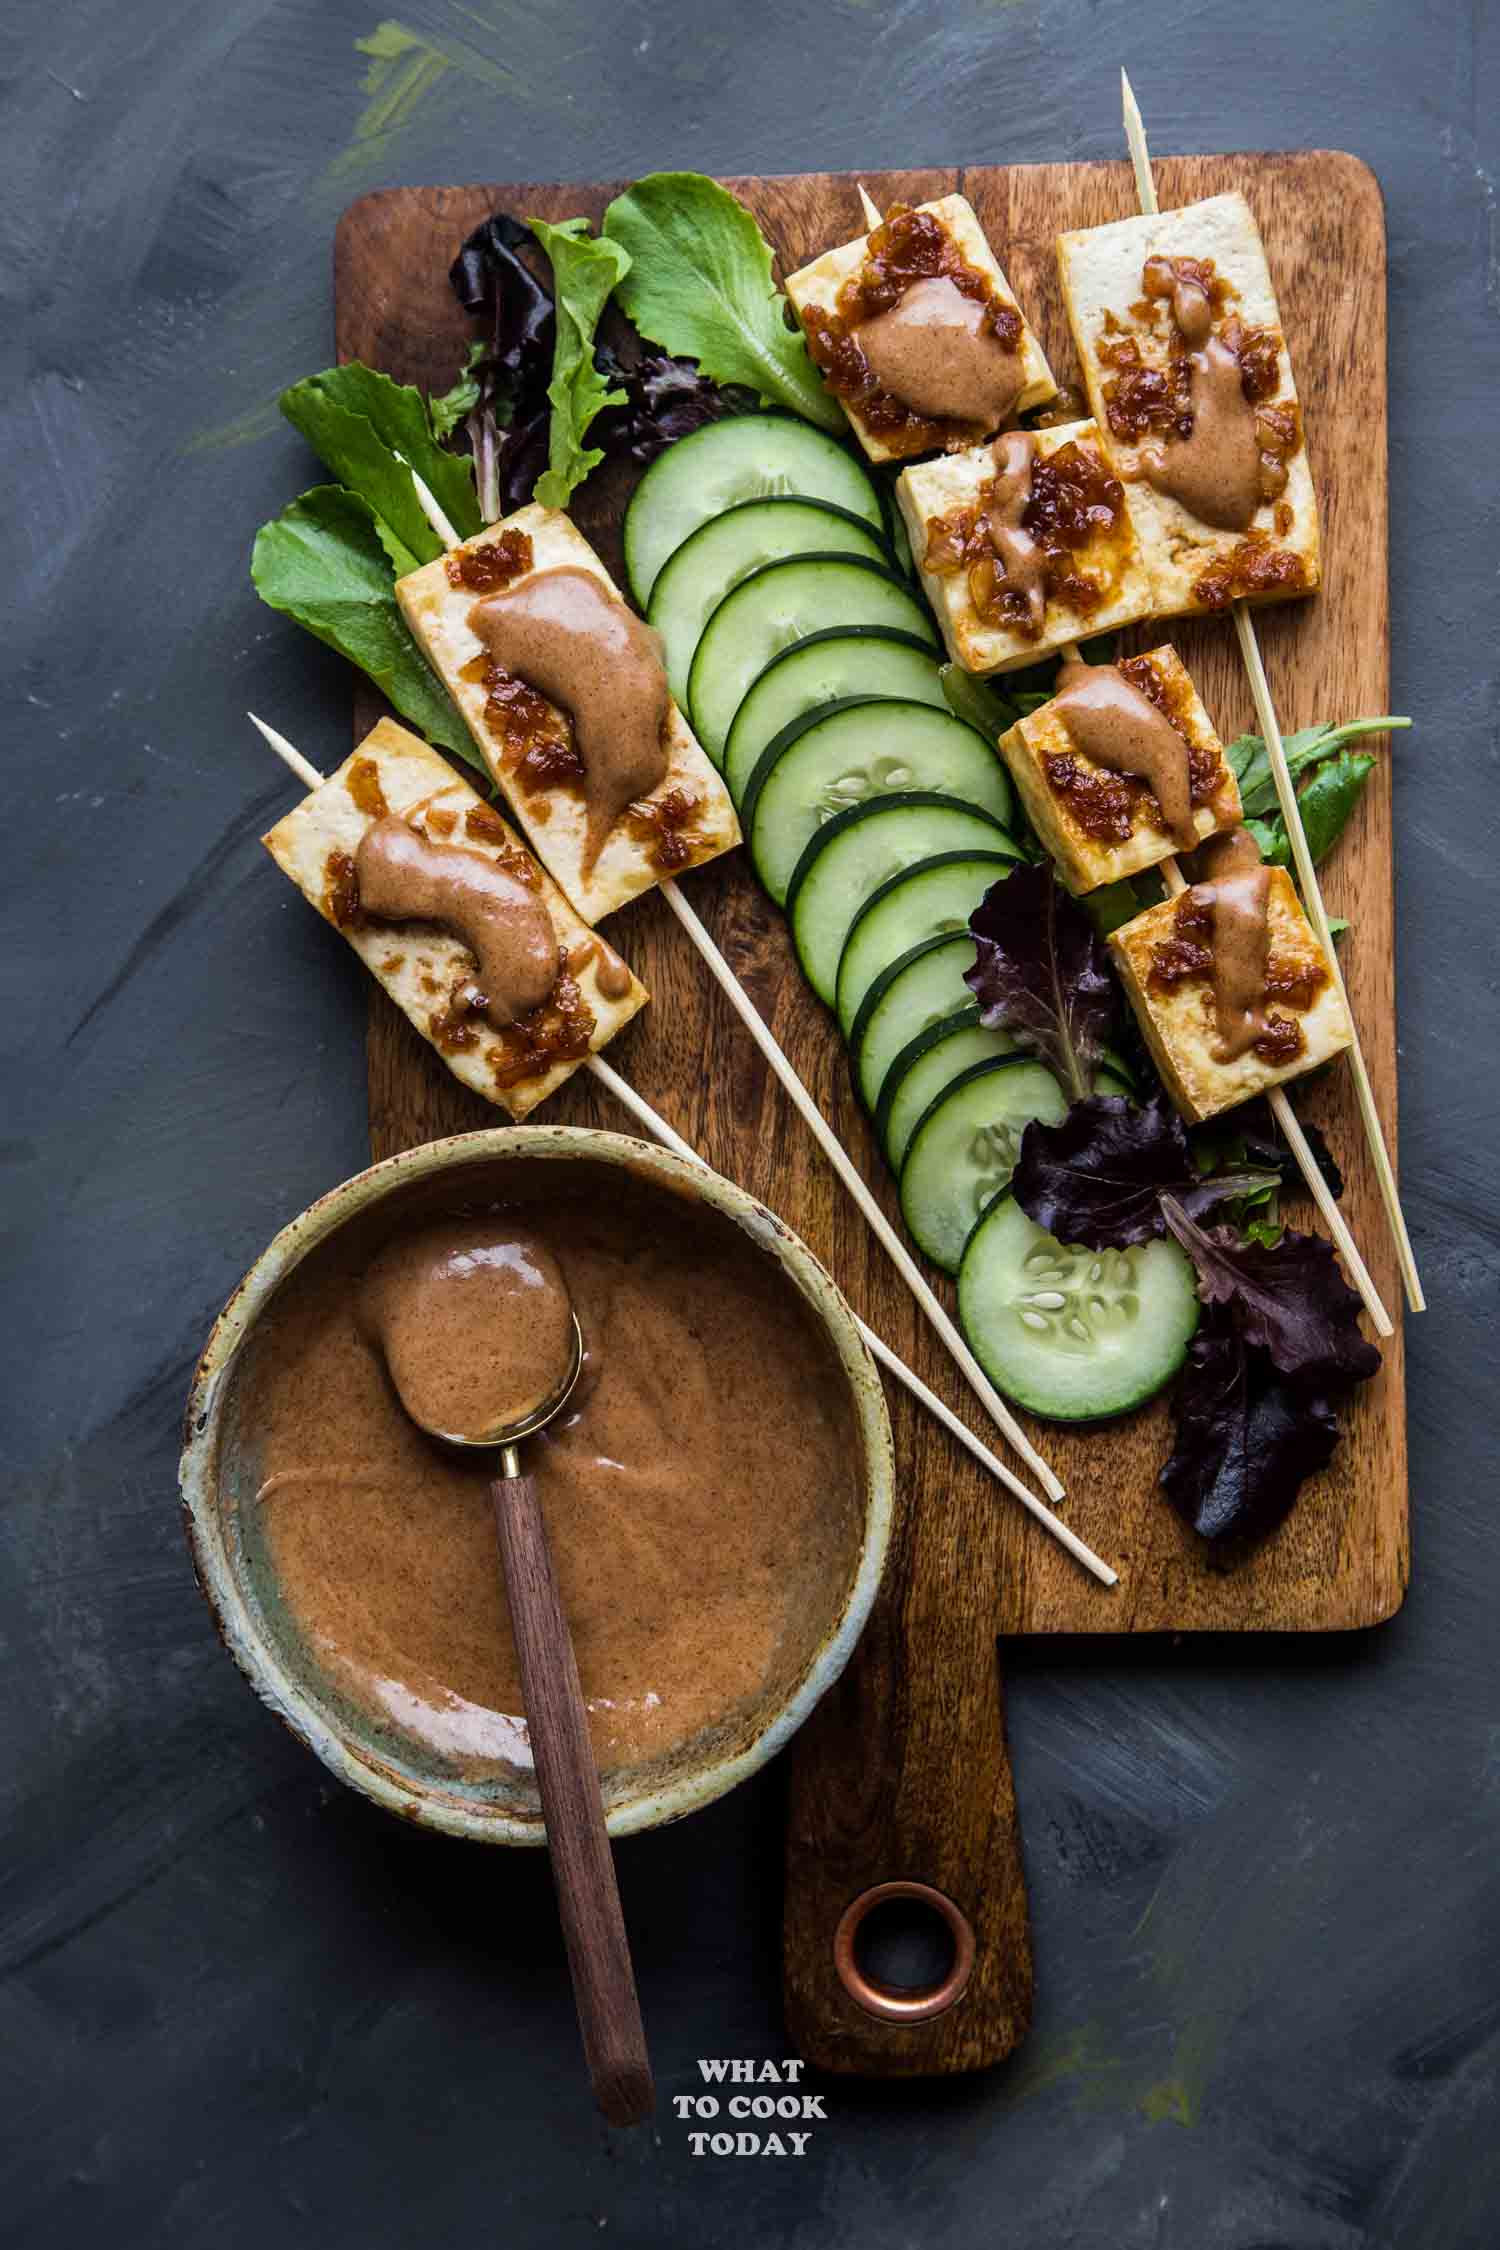 Tofu Satay with Almond Butter Sauce - Tofu is marinated in aromatic spices and serve with super easy, tasty, and creamy almond butter sauce. You will not think of tofu the same way again #ad #StartAHealthyRelationship